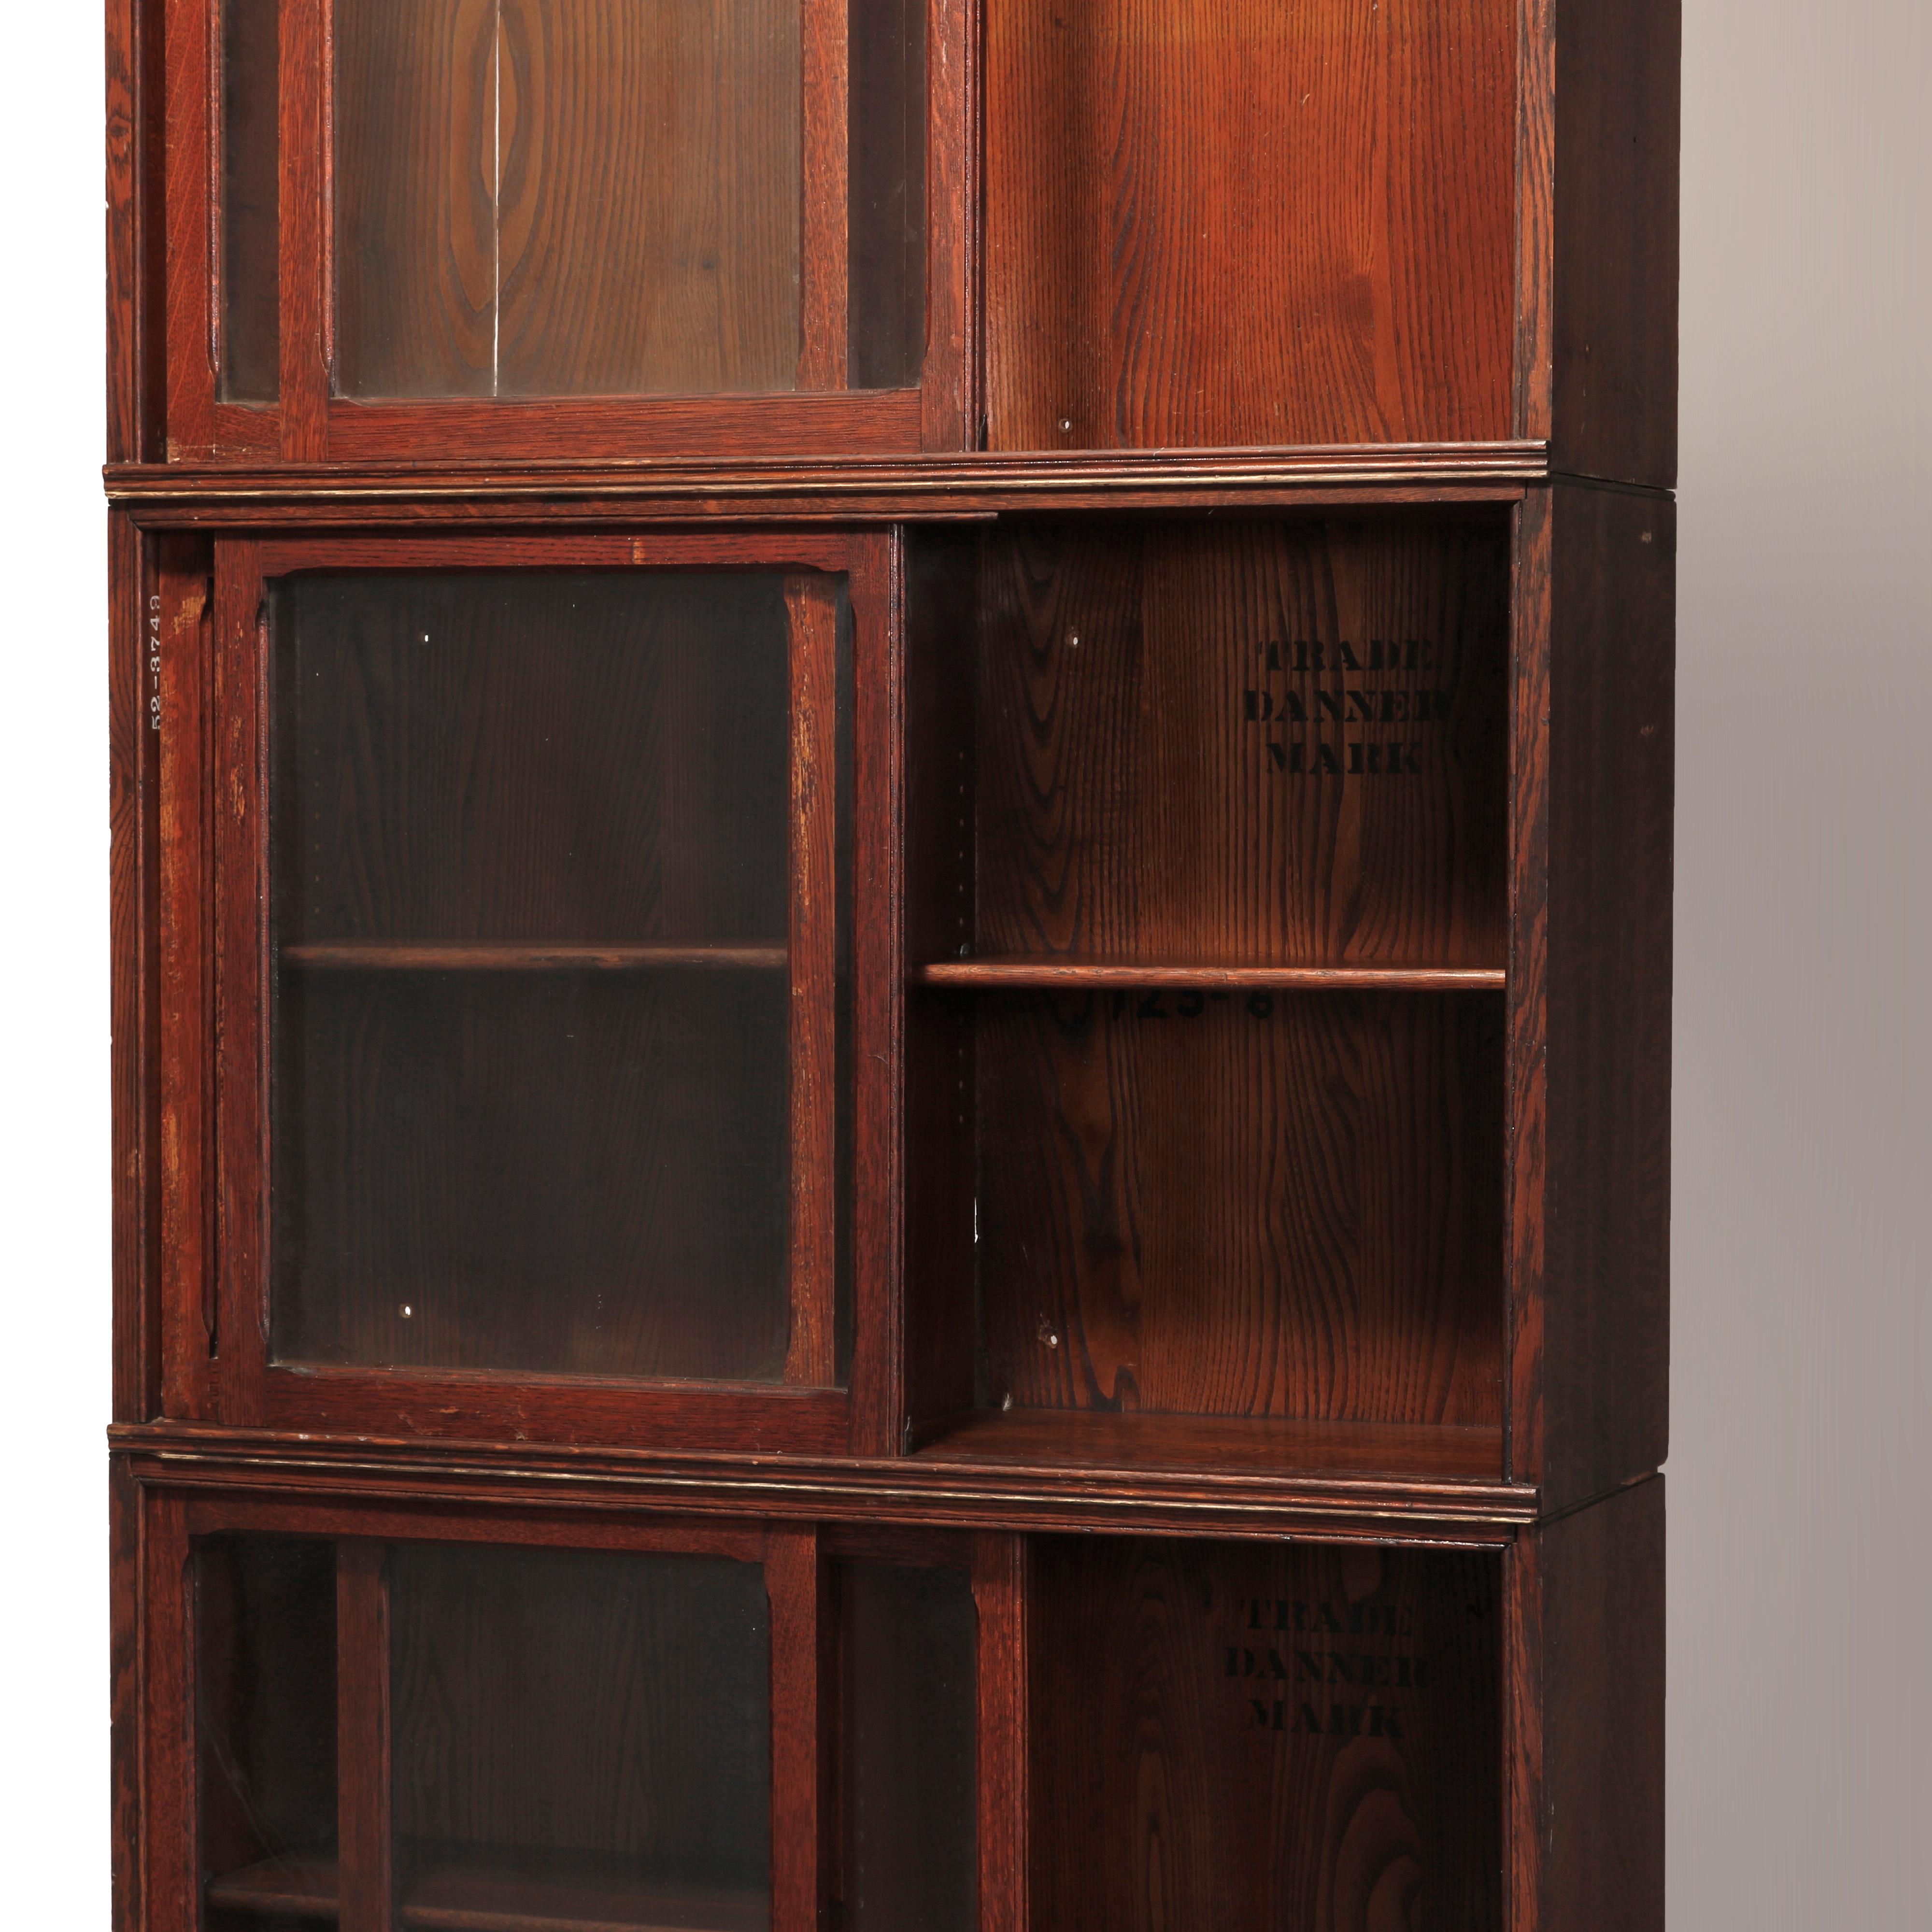 An antique Arts & Crafts Barrister bookcase by Danner offers oak construction with three stacks having sliding glass doors, maker stamp inside as photographed, circa 1910.

Measures: 82.25